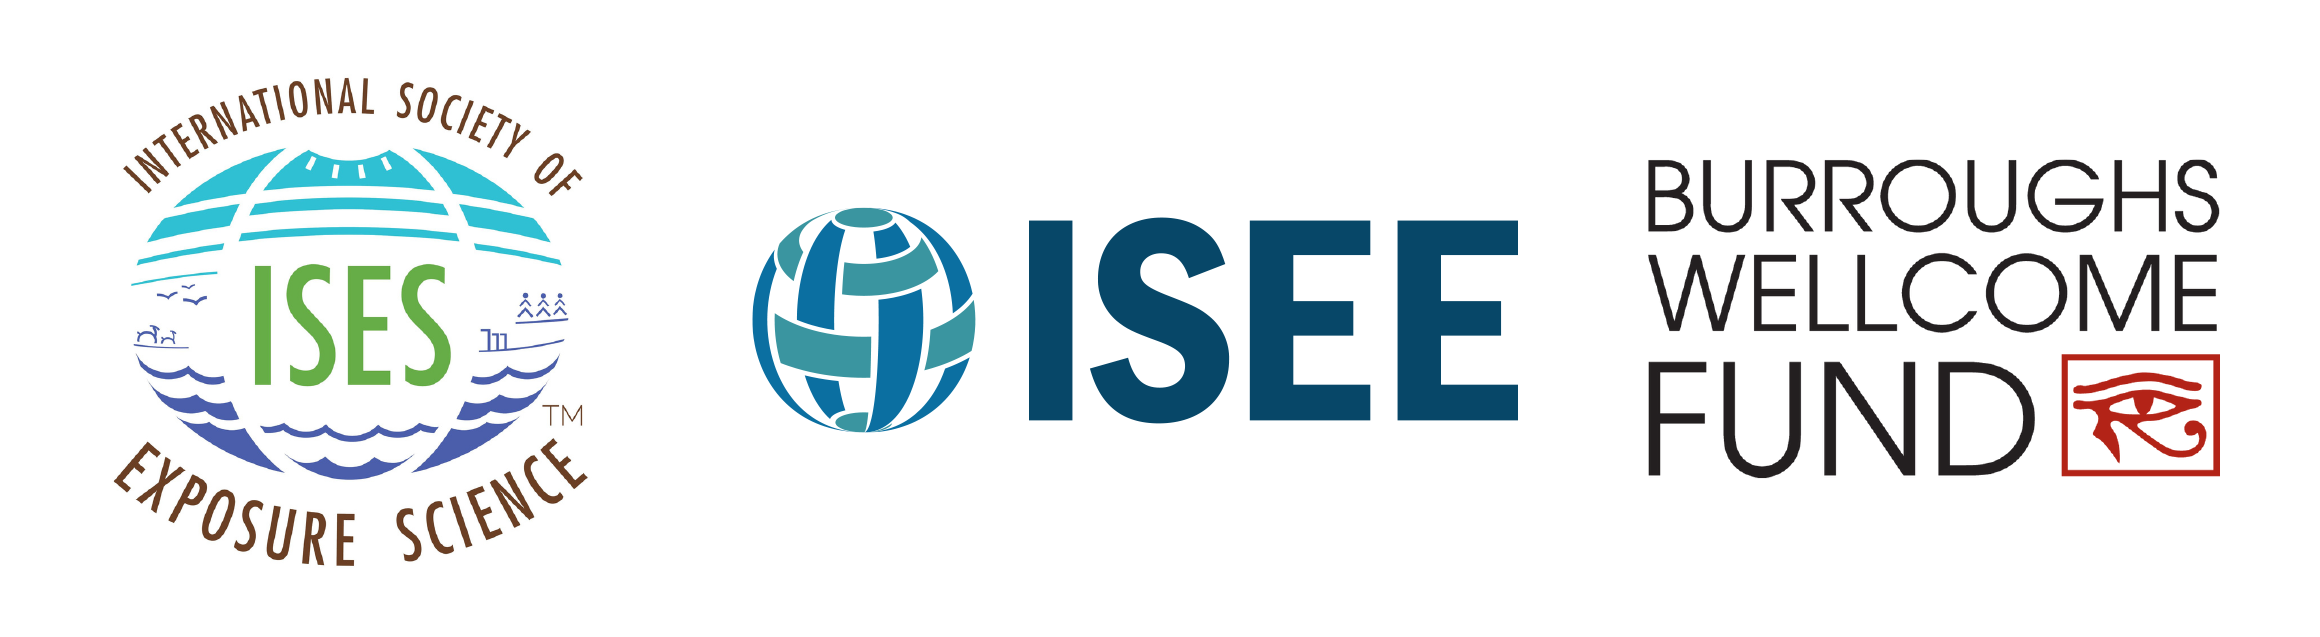 Logos of ISES, ISEE, and Burroughs Welcome Fund